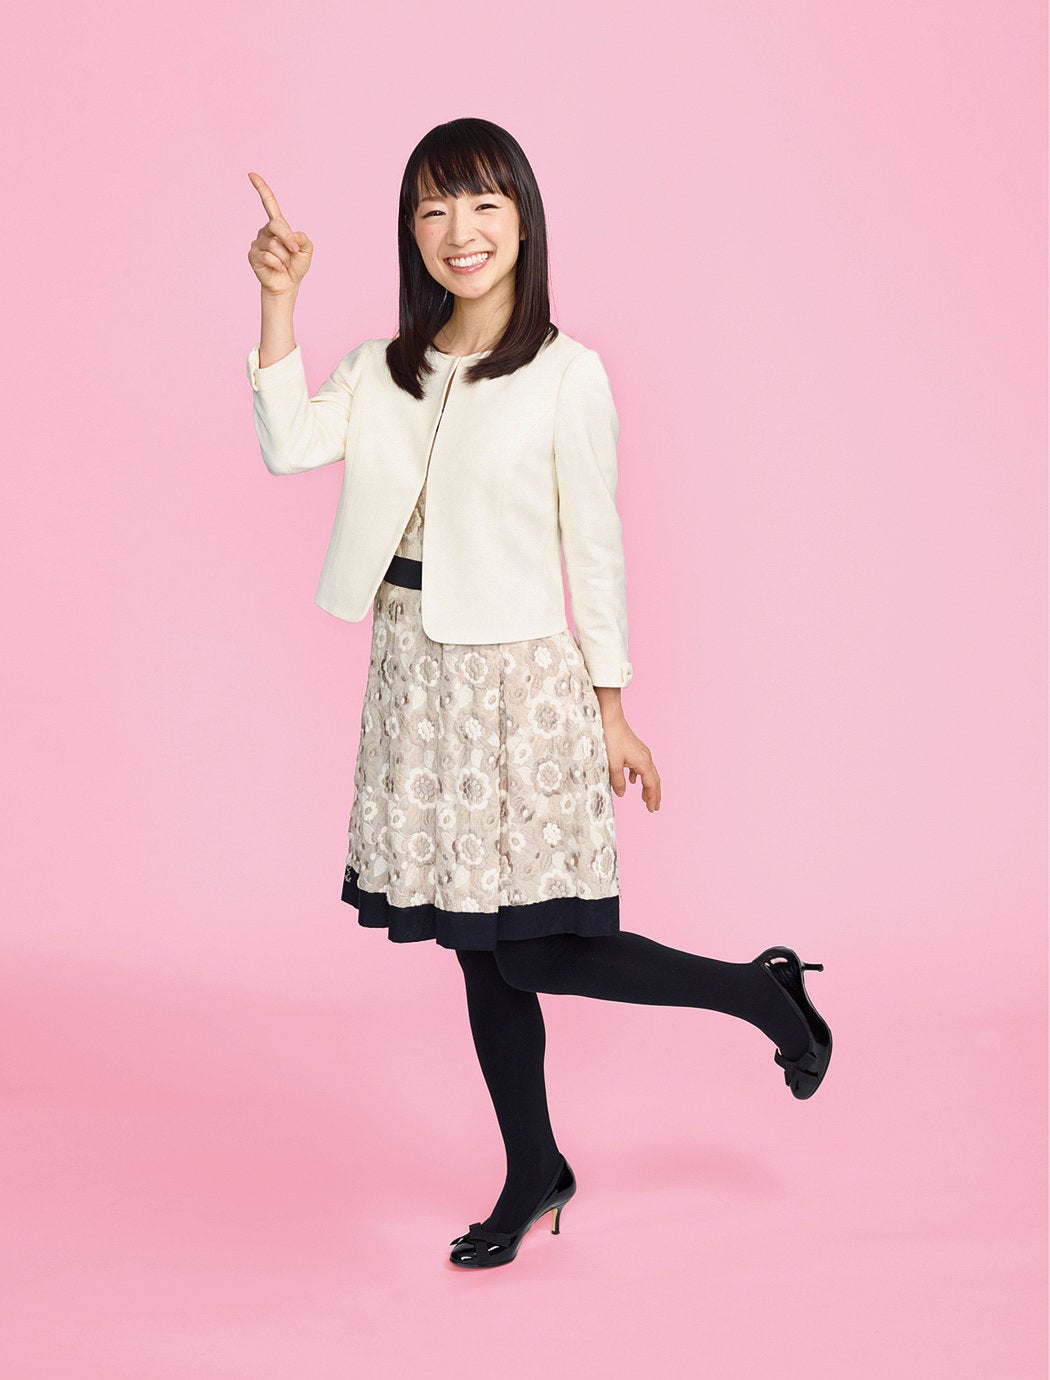 9 Things You Probably Didn't Know About Tidying Guru Marie Kondo - WORLD OF BUZZ 2